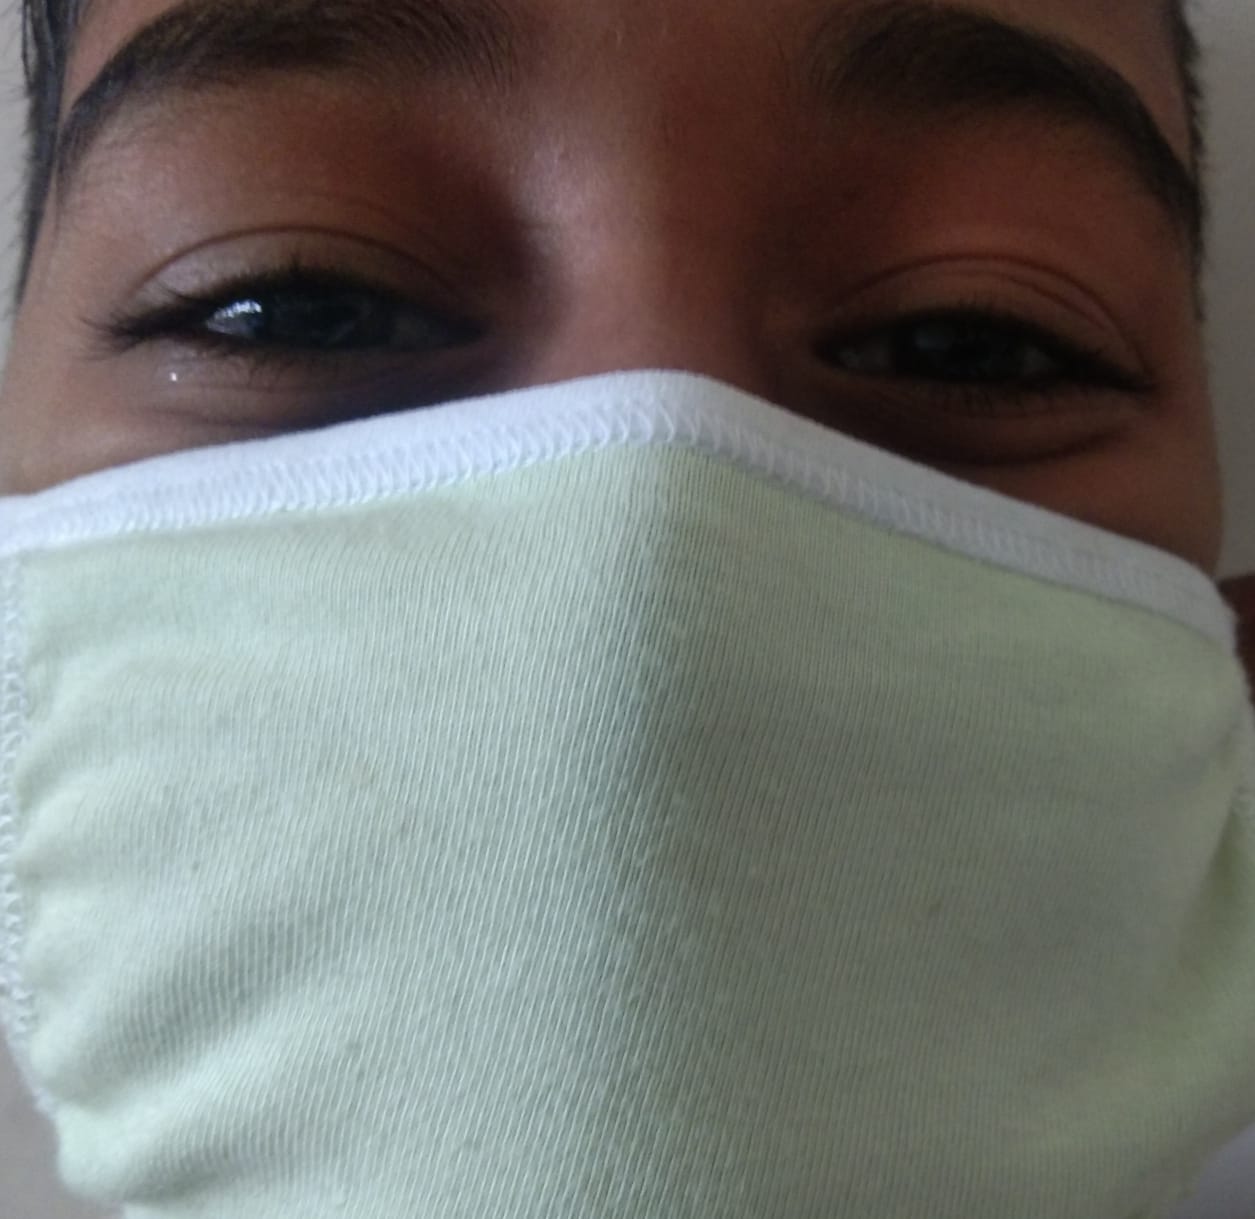 Don't go out without a mask.... mask will keep coronavirus away..